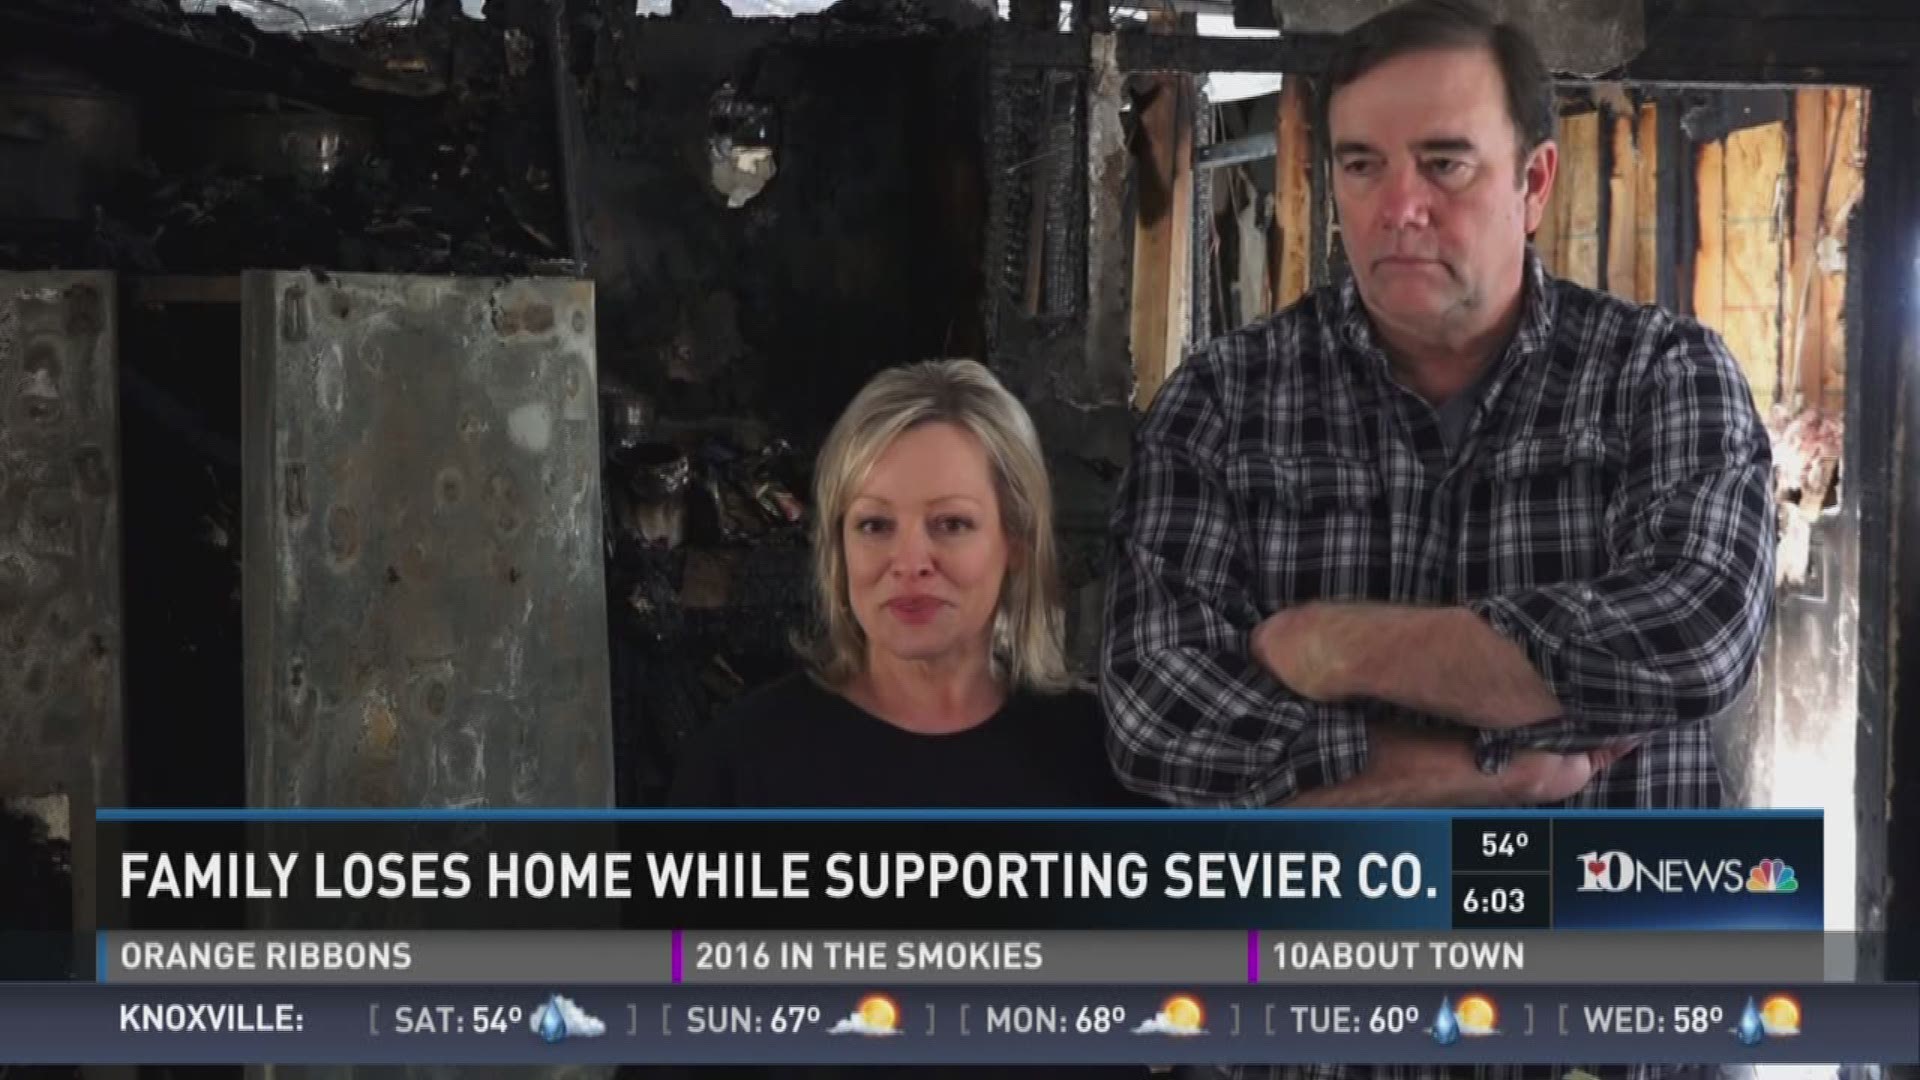 A Roane County family who had gone to help support Sevier County fire victims now has suffered their own setback - the destruction loss of their own home to fire. Dec. 23, 2016